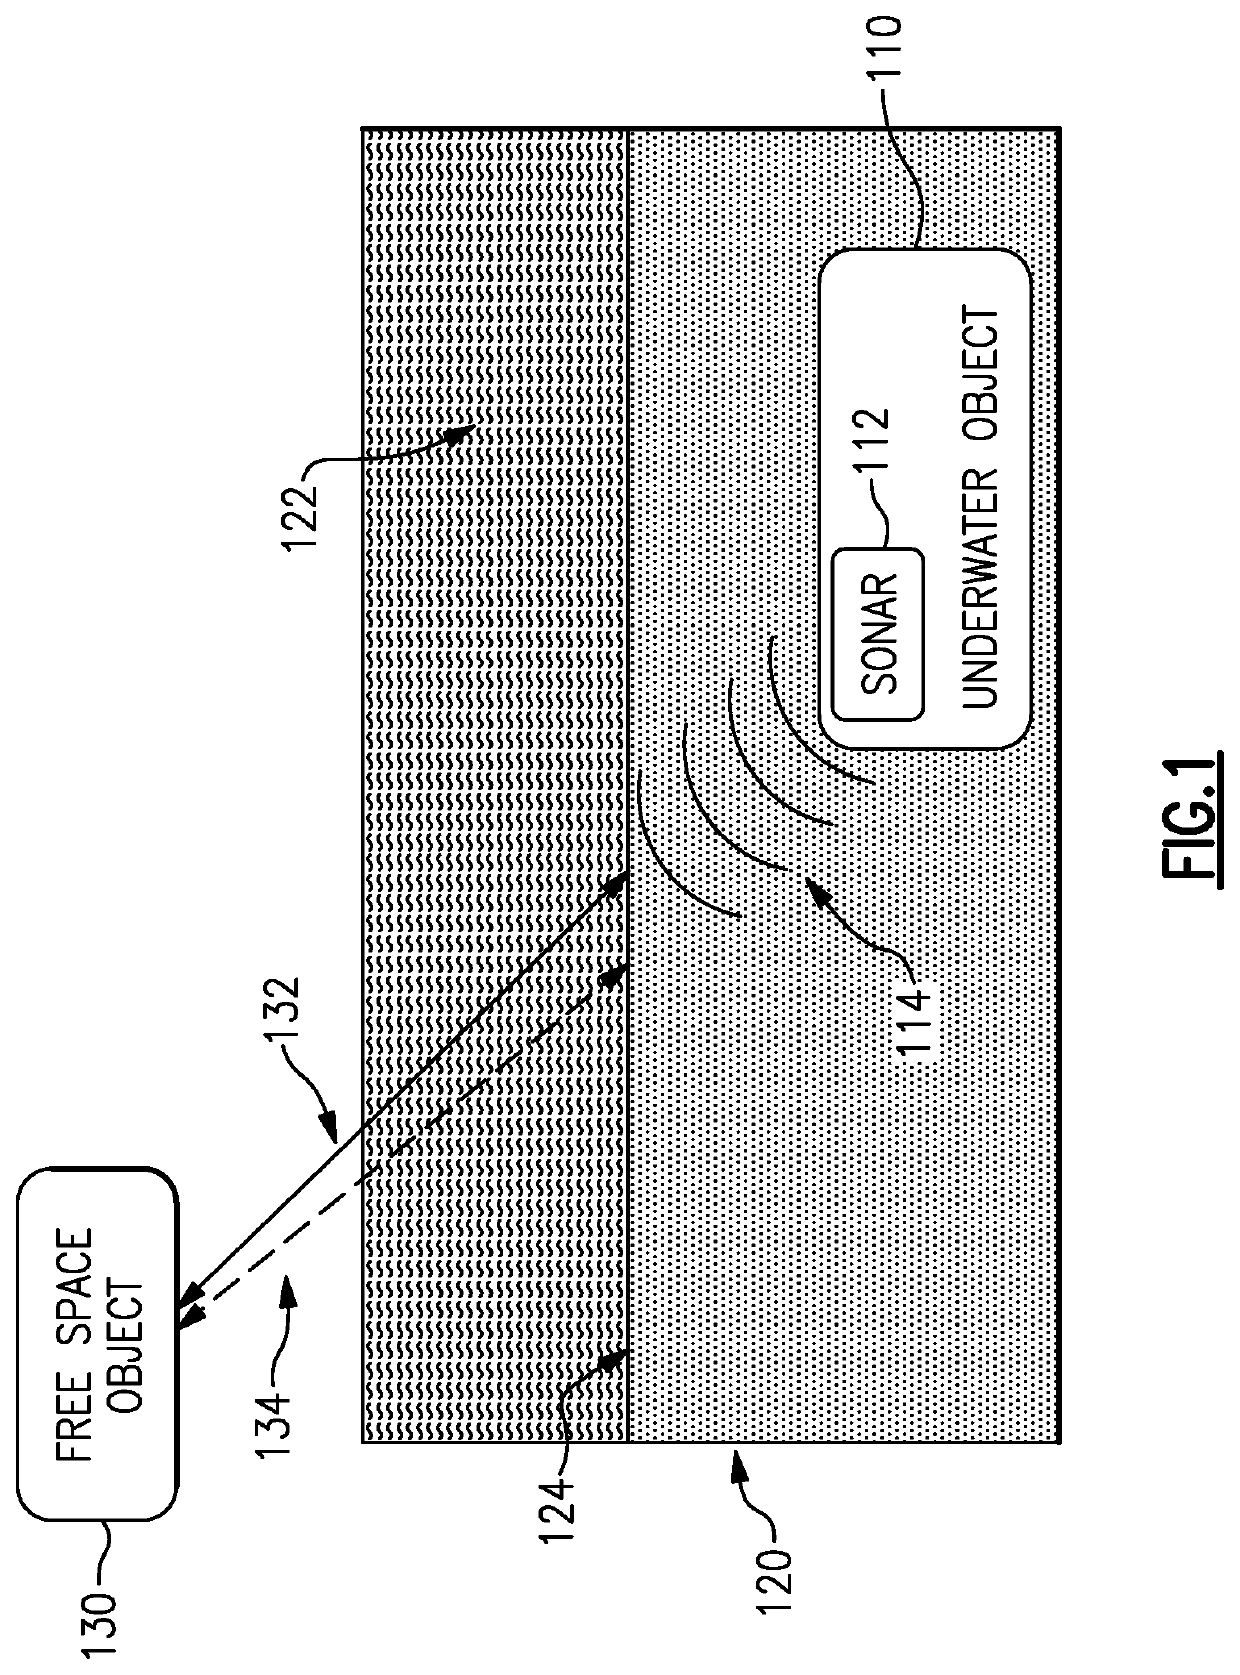 Optical to acoustic communications systems and methods